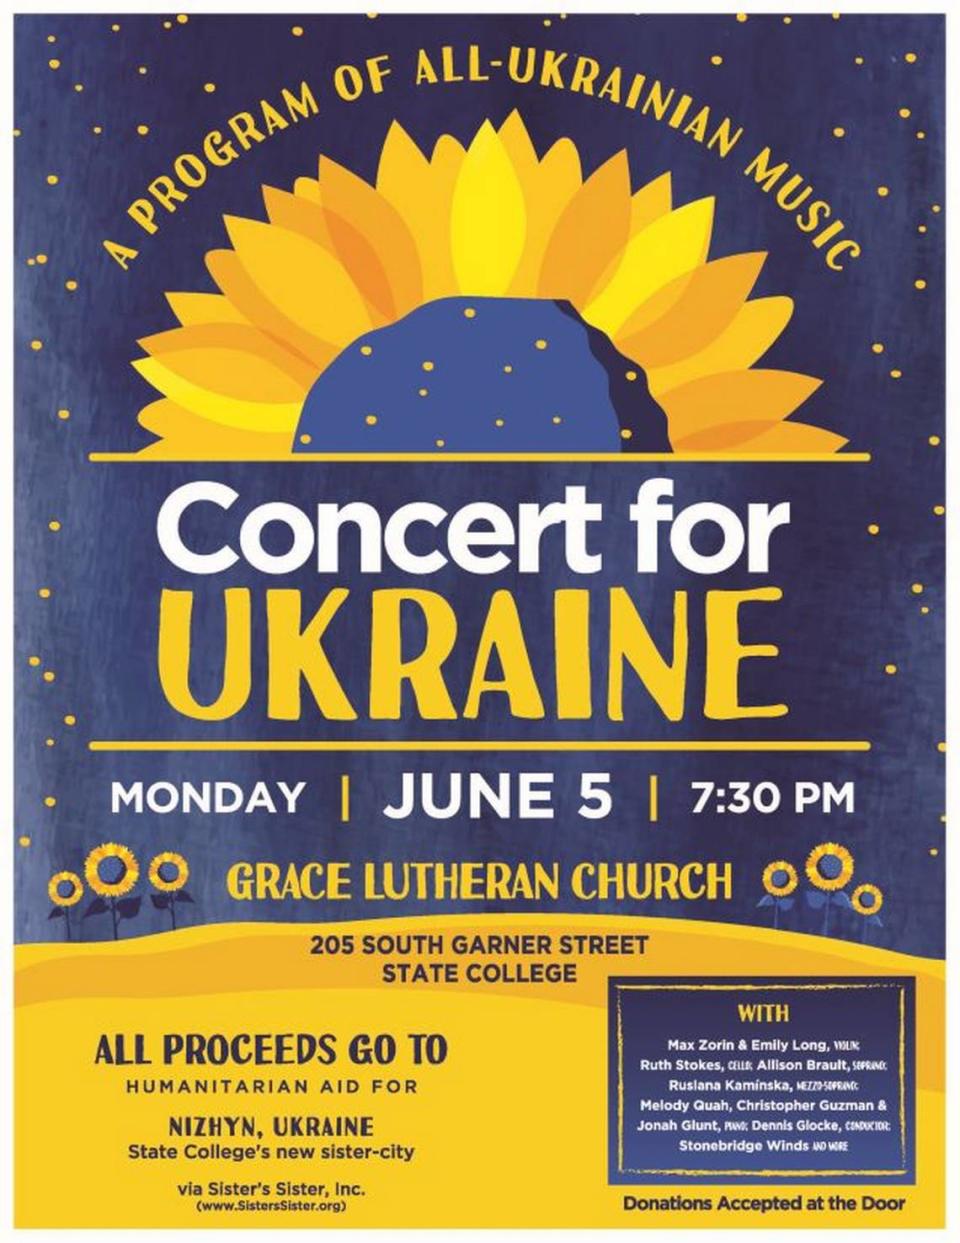 A copy of the “Concert for Ukraine” flyer.